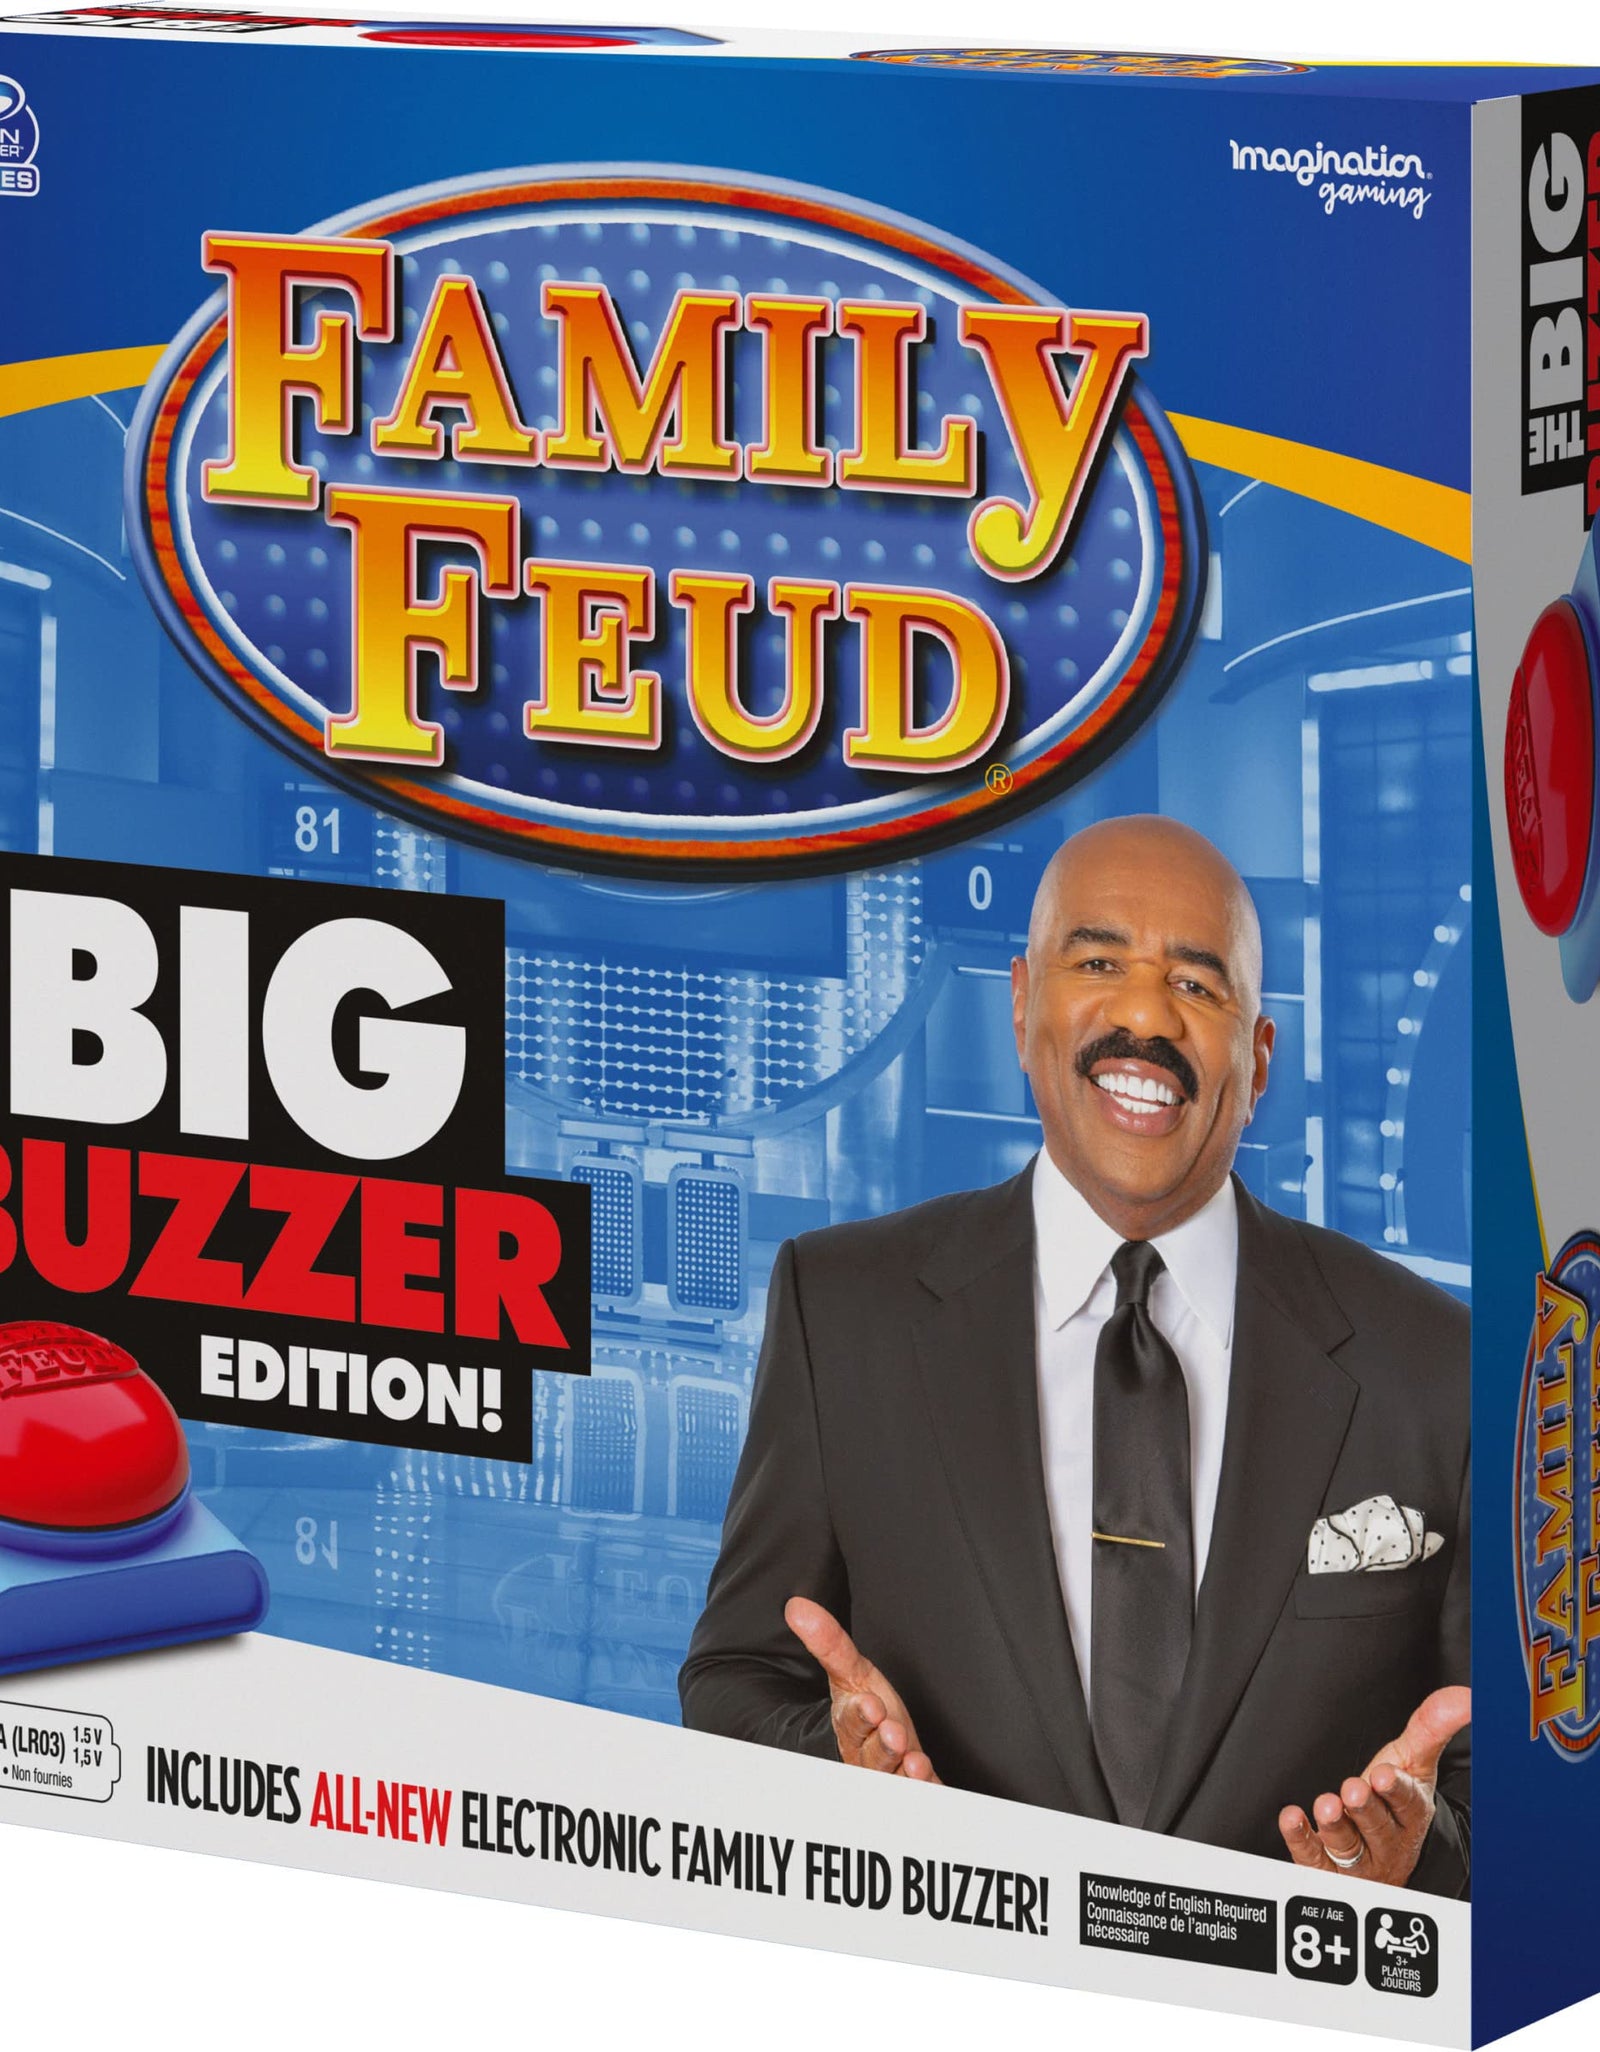 Family Feud Big Buzzer Game, Amazon Exclusive “Buzz in” with The Electronic Buzzer Board Game for Hilarious Family Fun, Ages 8 and up